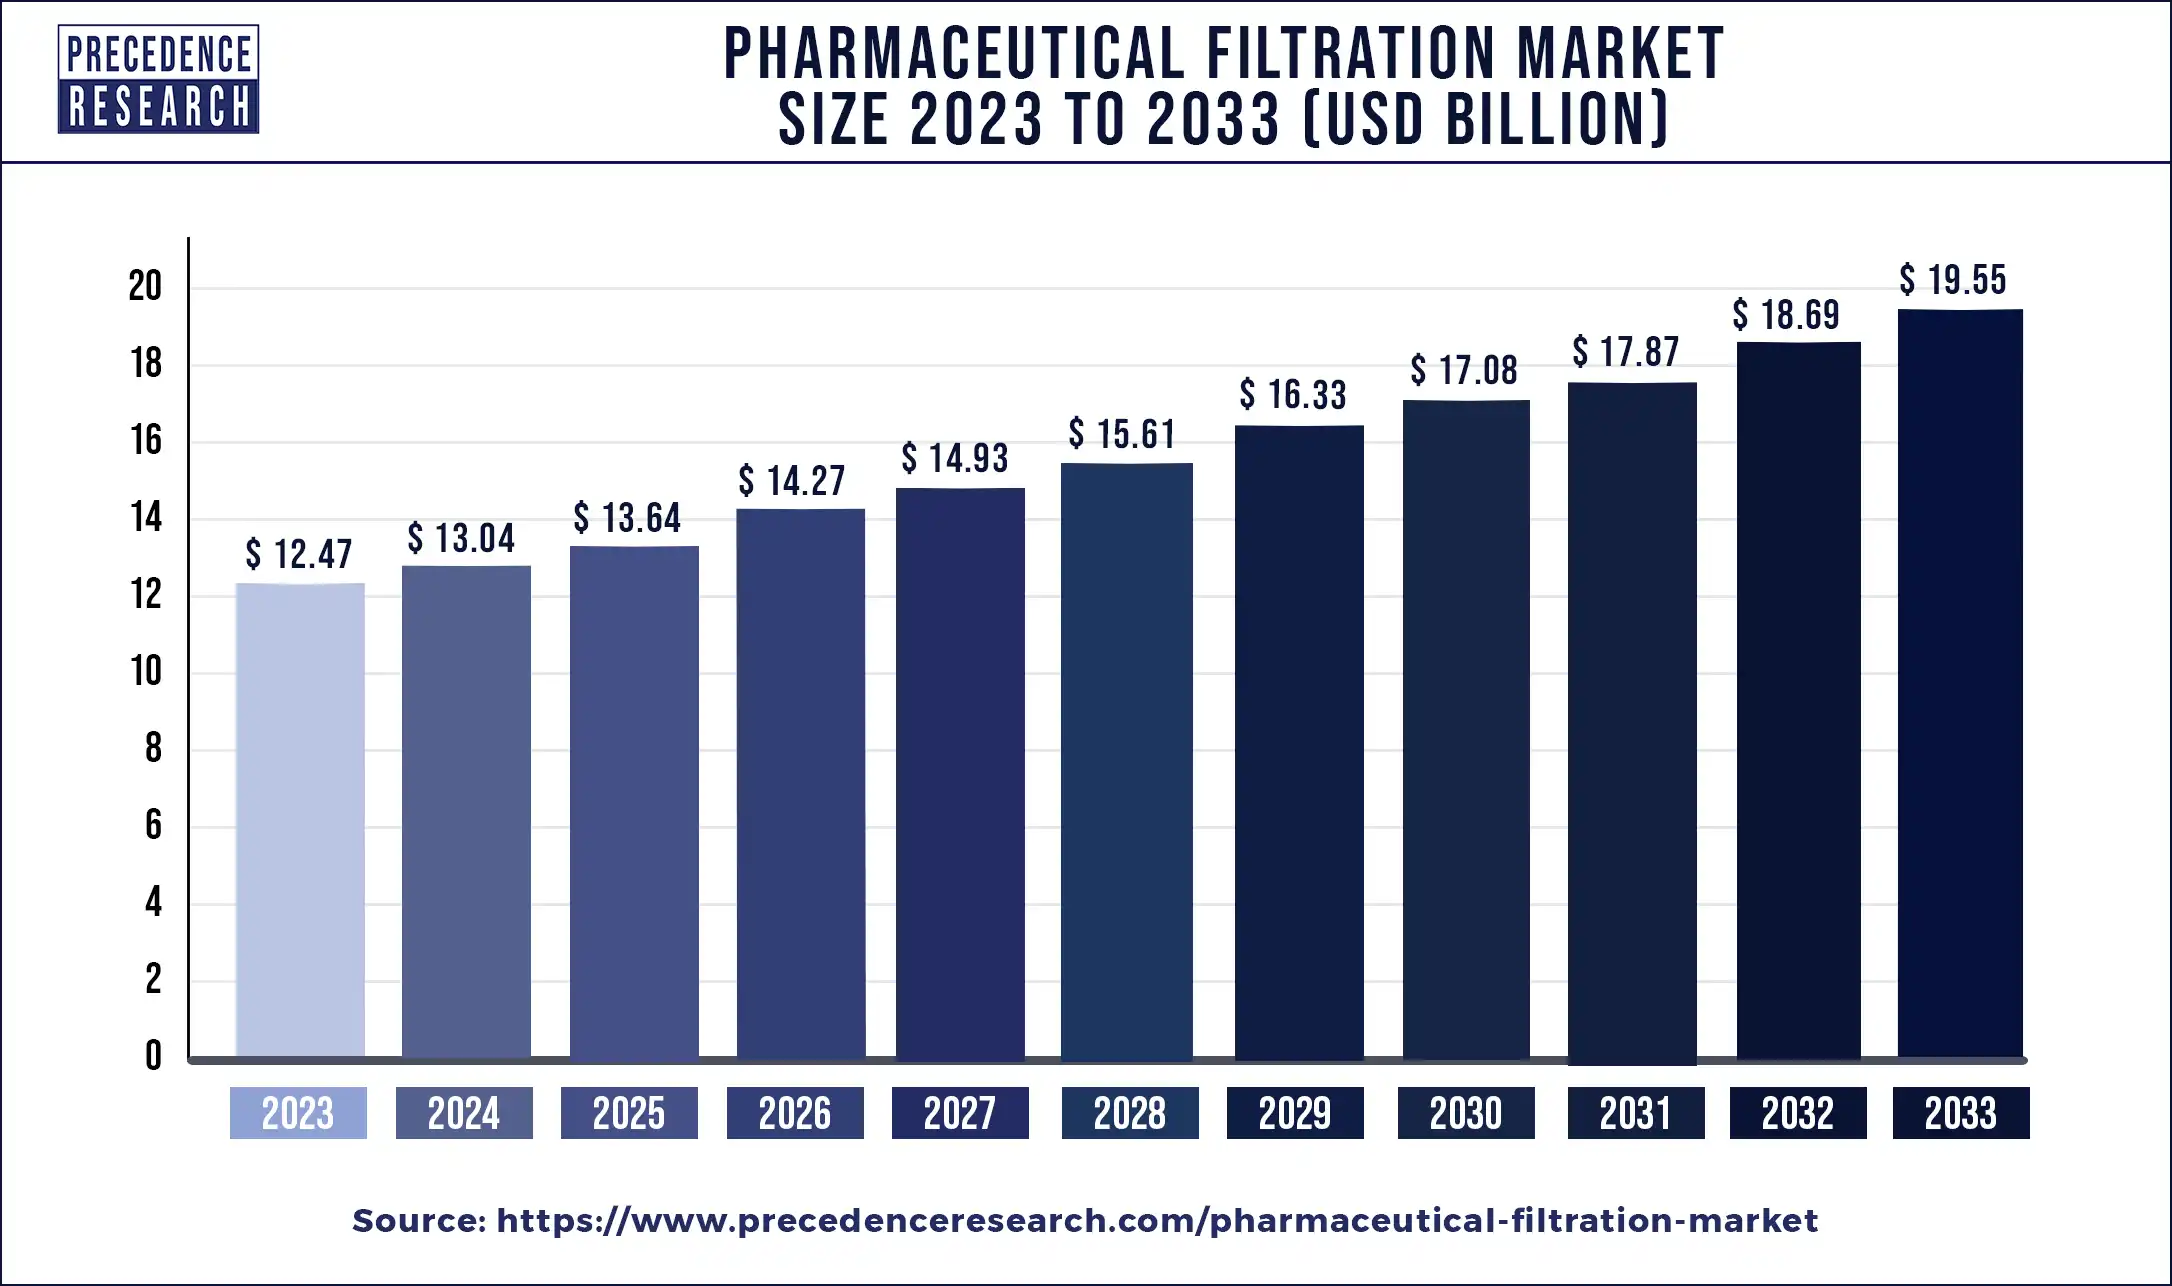 Pharmaceutical Filtration Market Size 2024 to 2033